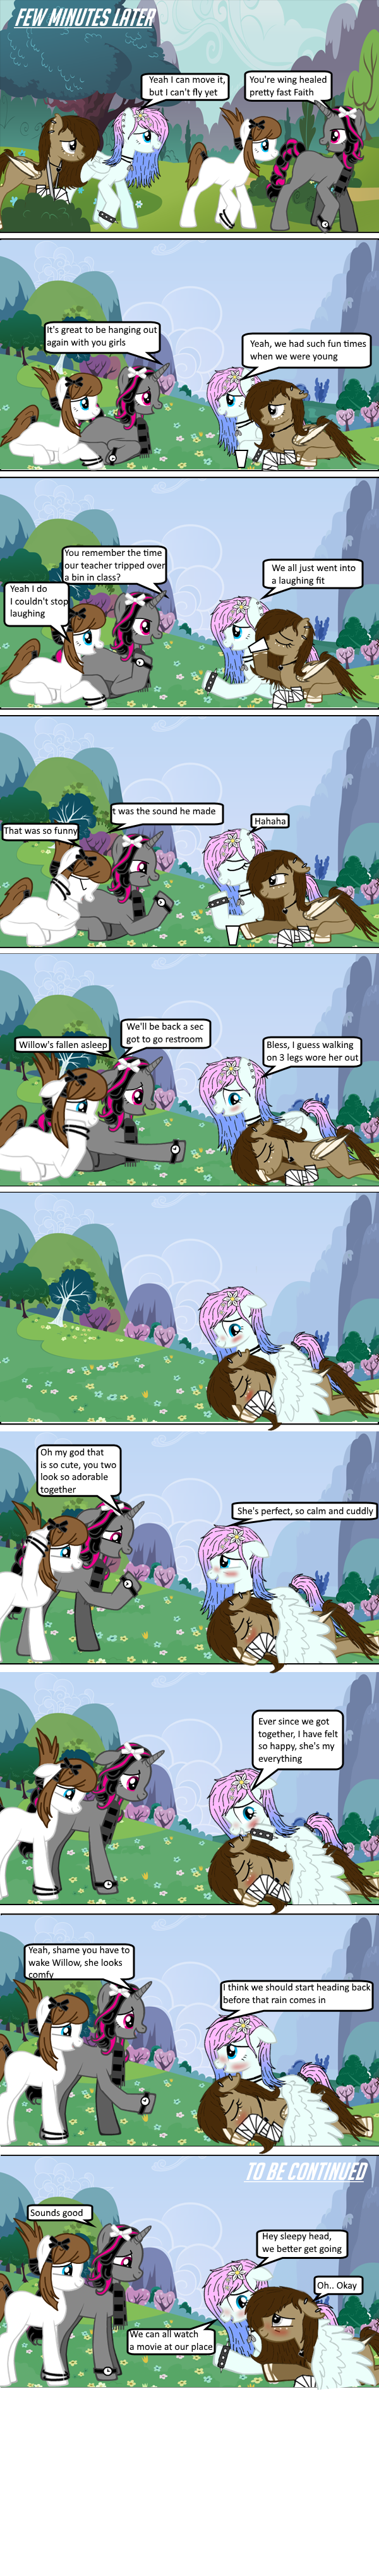 Page 6 - Quality Time With Friends